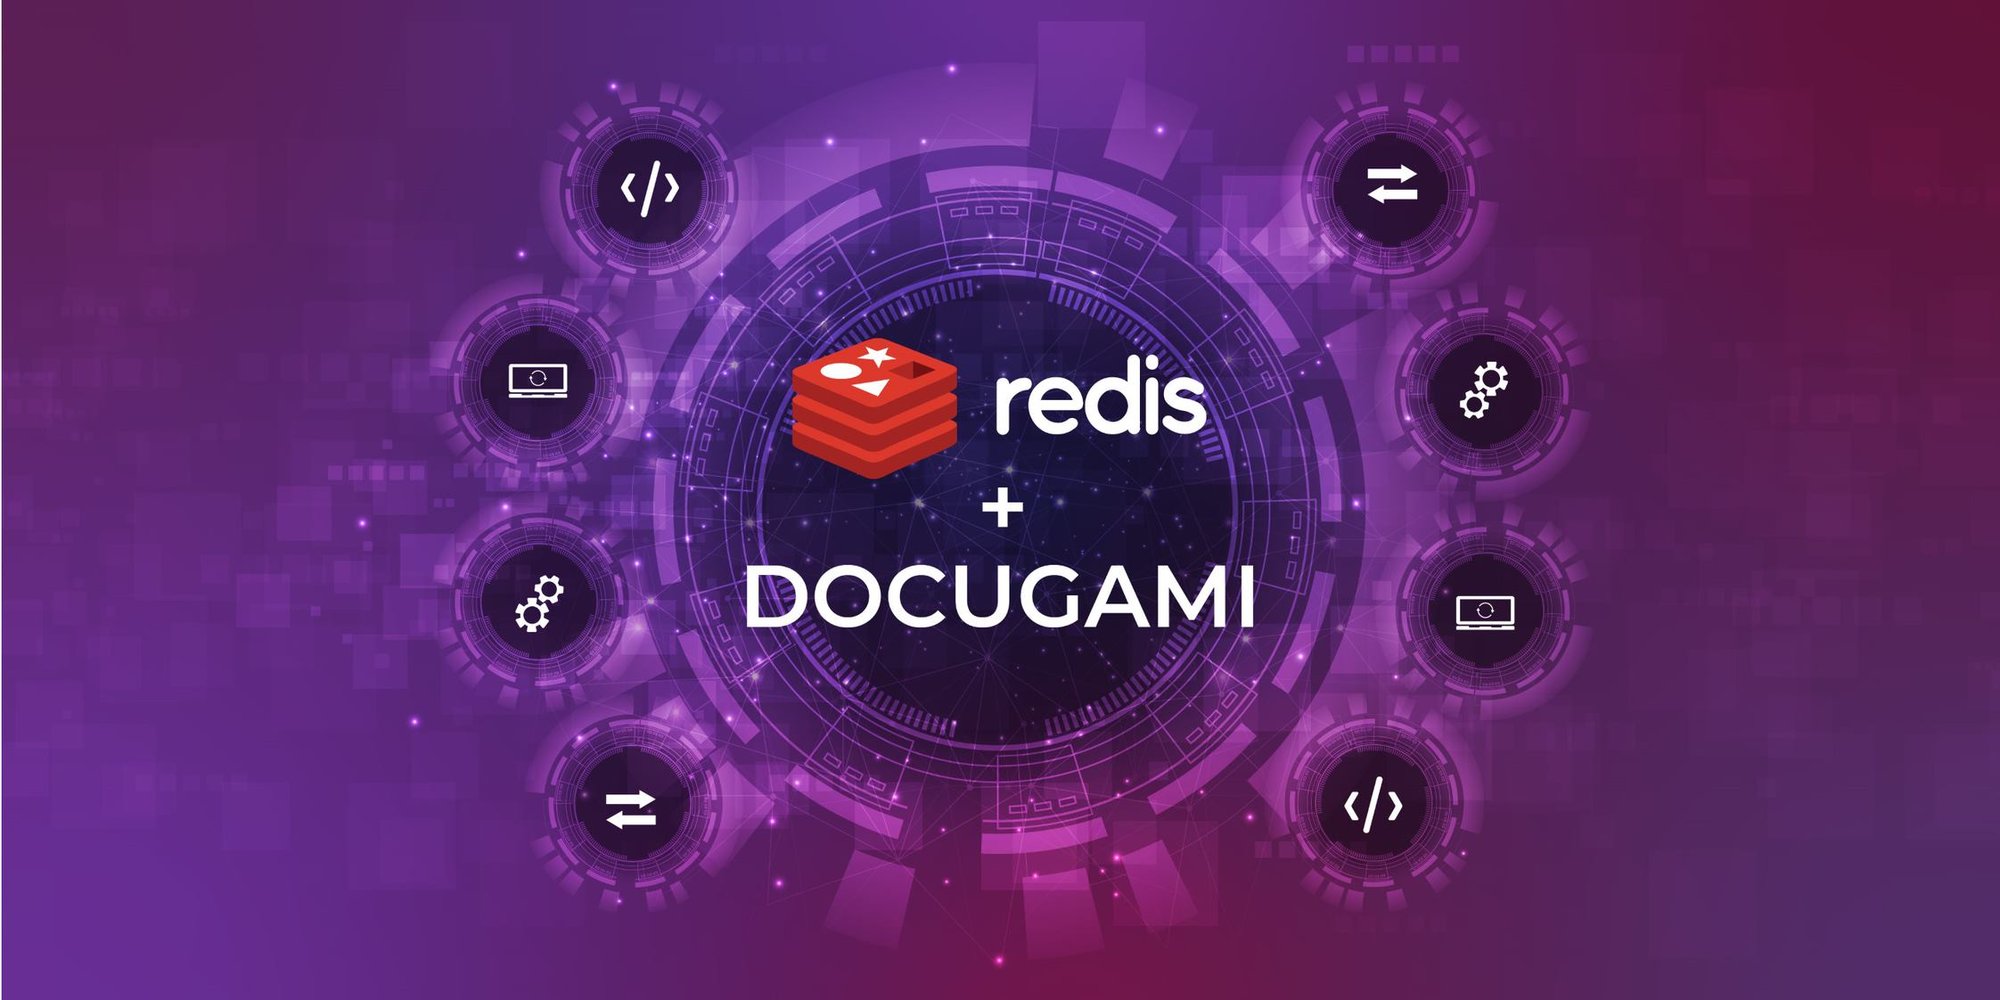 The Redis logo and Redis name with Docugami, in an image of icons demonstrating various digital capabilities.